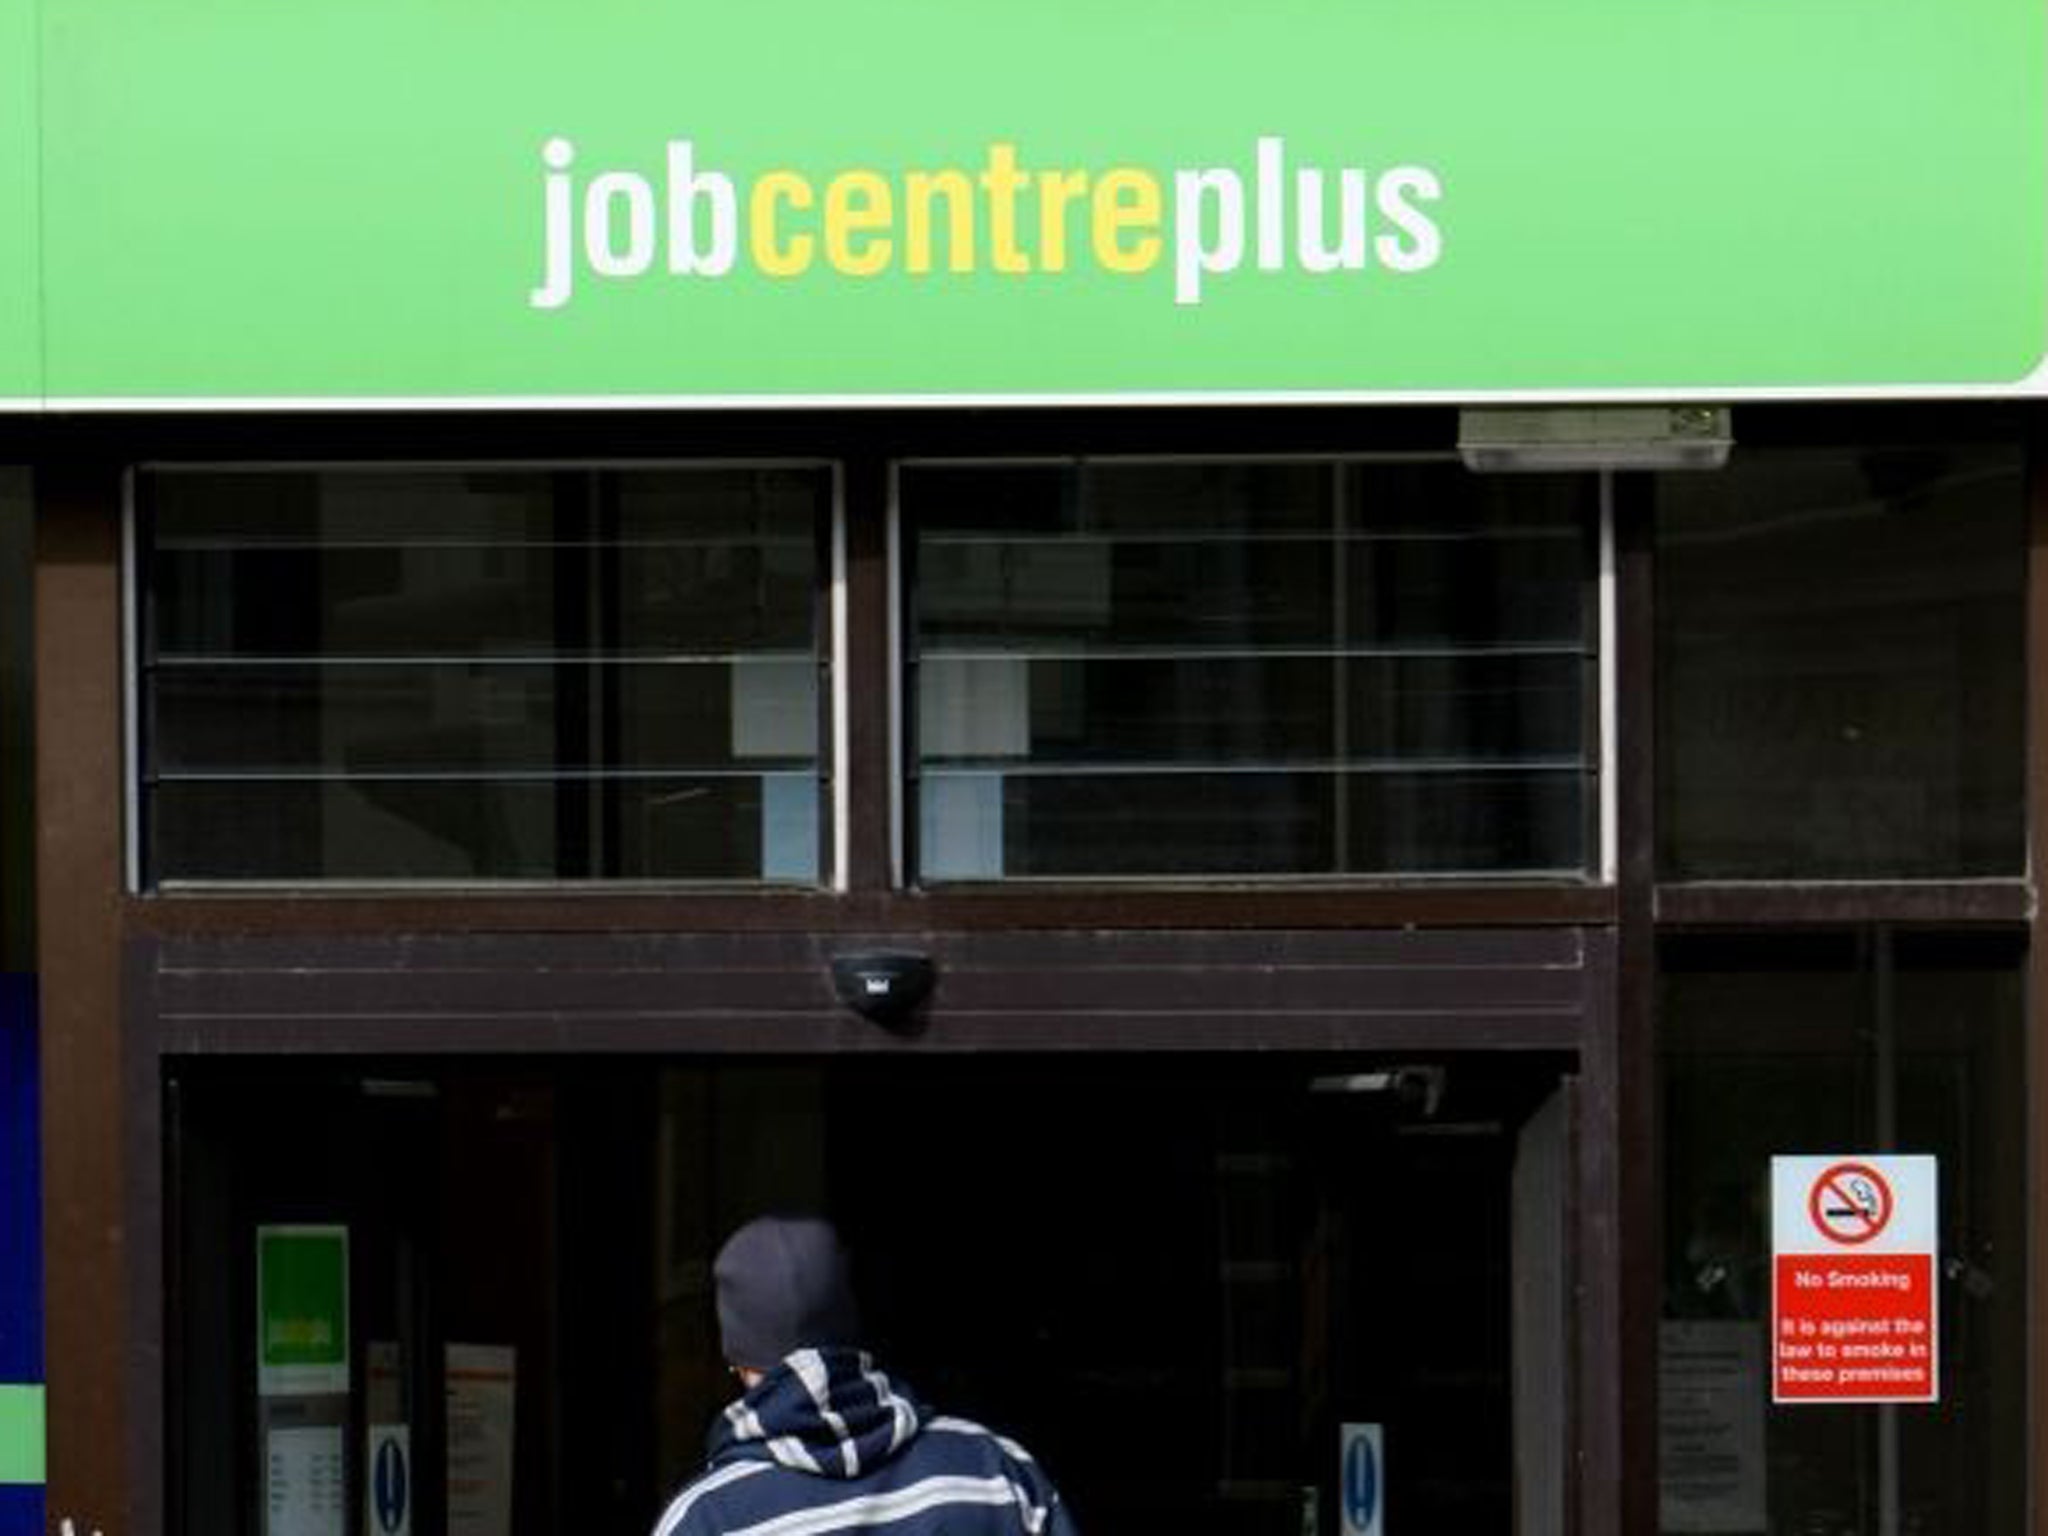 Ministers welcomed the unemployment figures, which also showed a further dip in the numbers claiming jobseeker's allowance